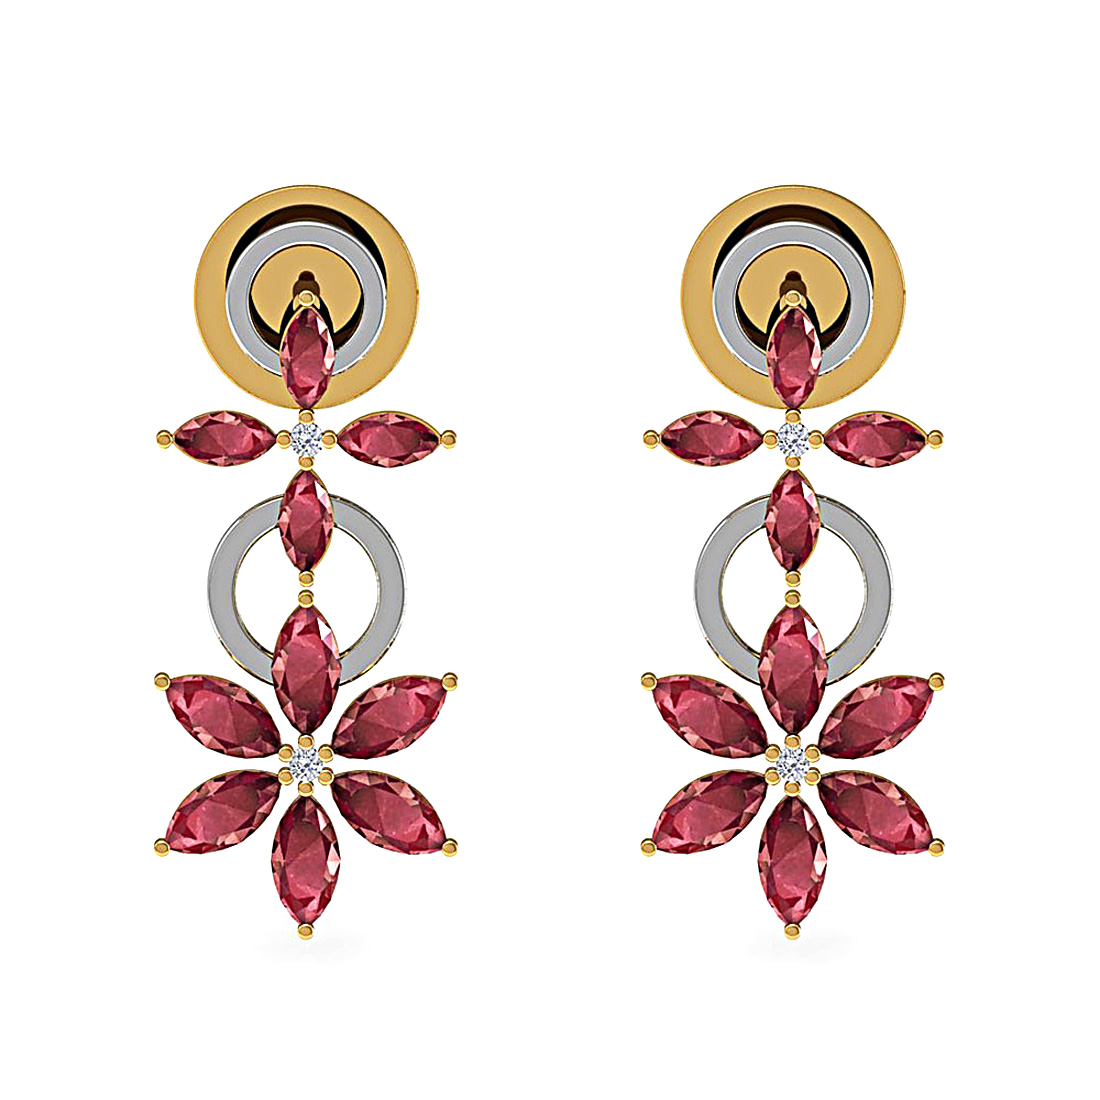 Natural diamond & ruby stud earrings made in 18k solid gold